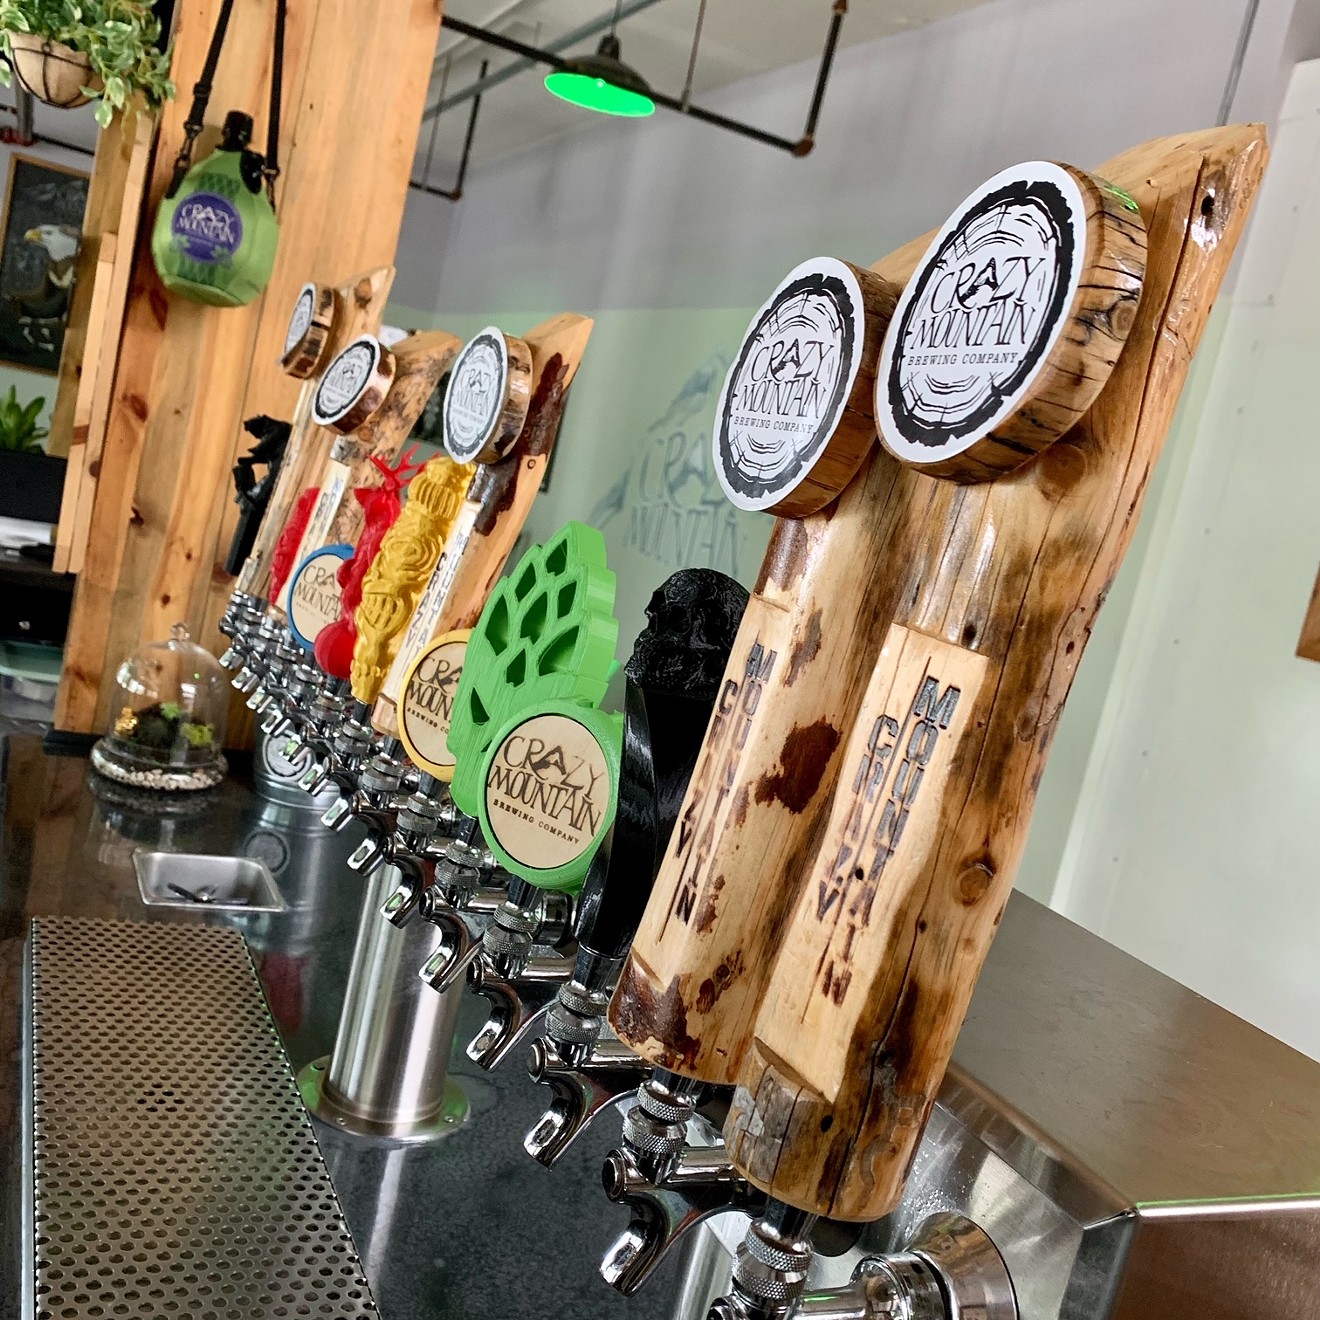 The taps at Crazy Mountain will offer a wide variety of beers.